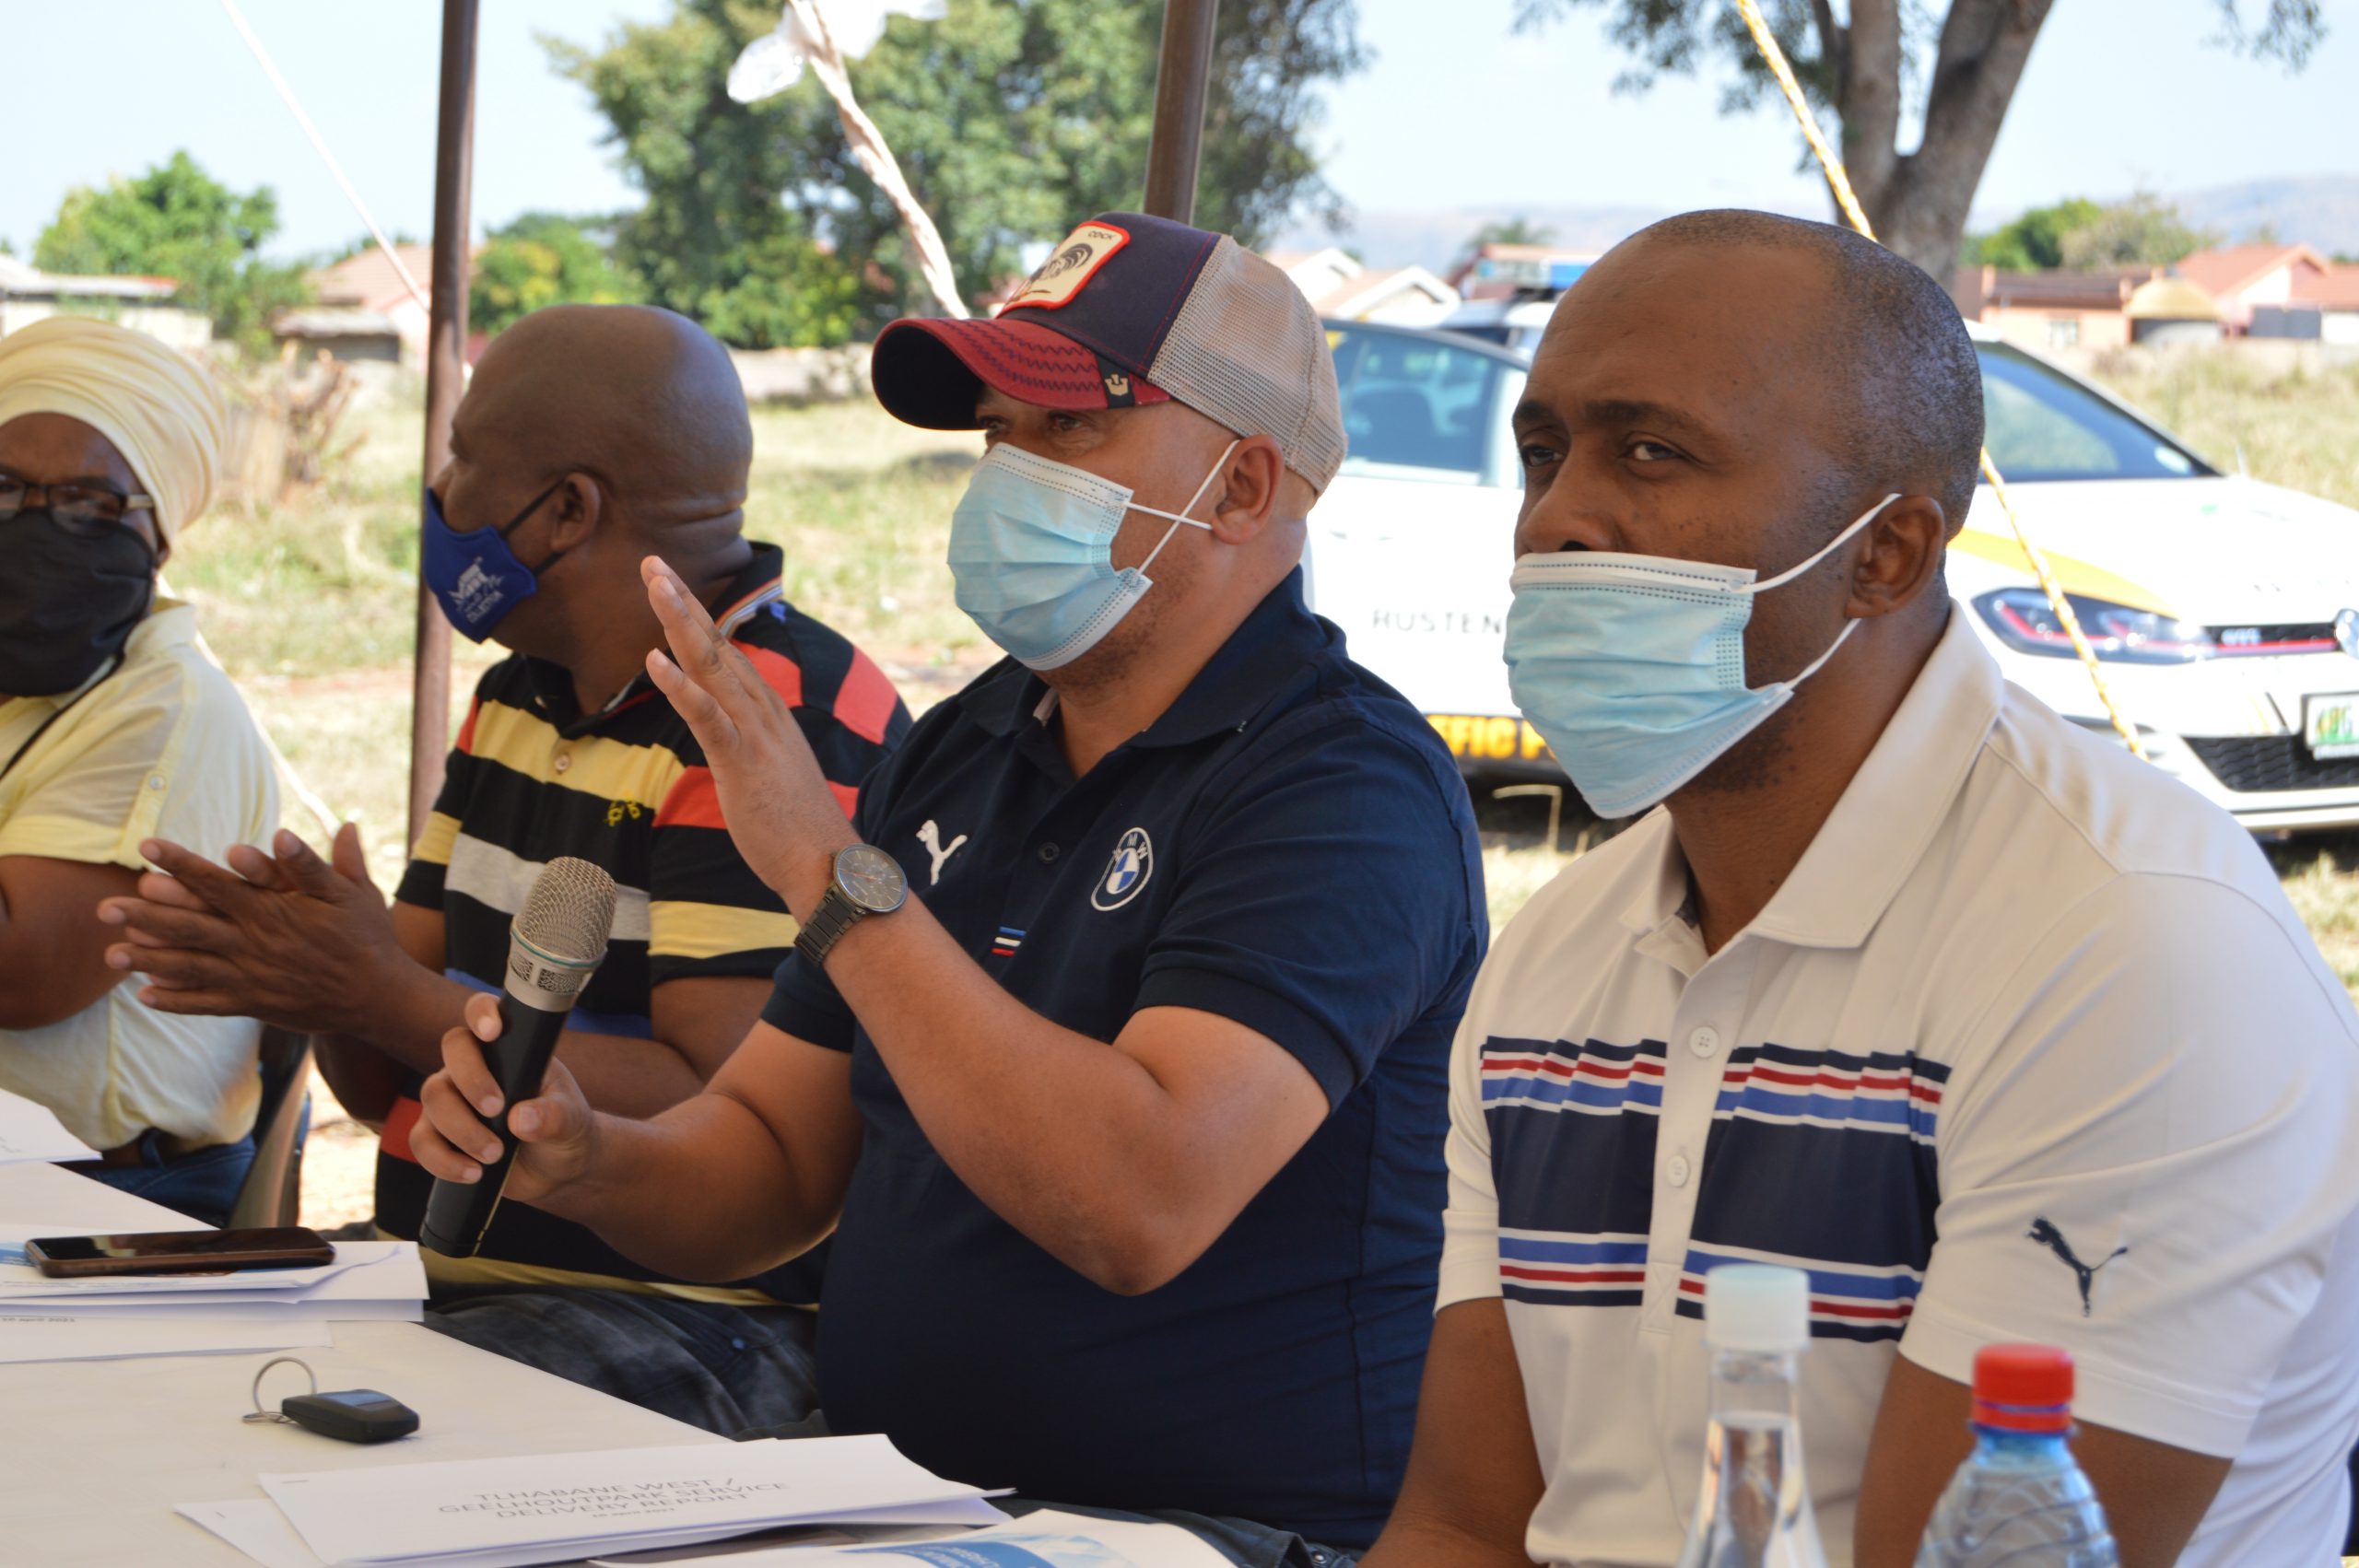 Media Release – RLM Mayor, MAYCO Members and EXCO Descend Upon Tlhabane  West to Engage Community Over Service Delivery Concerns | Rustenburg Local  Municipality